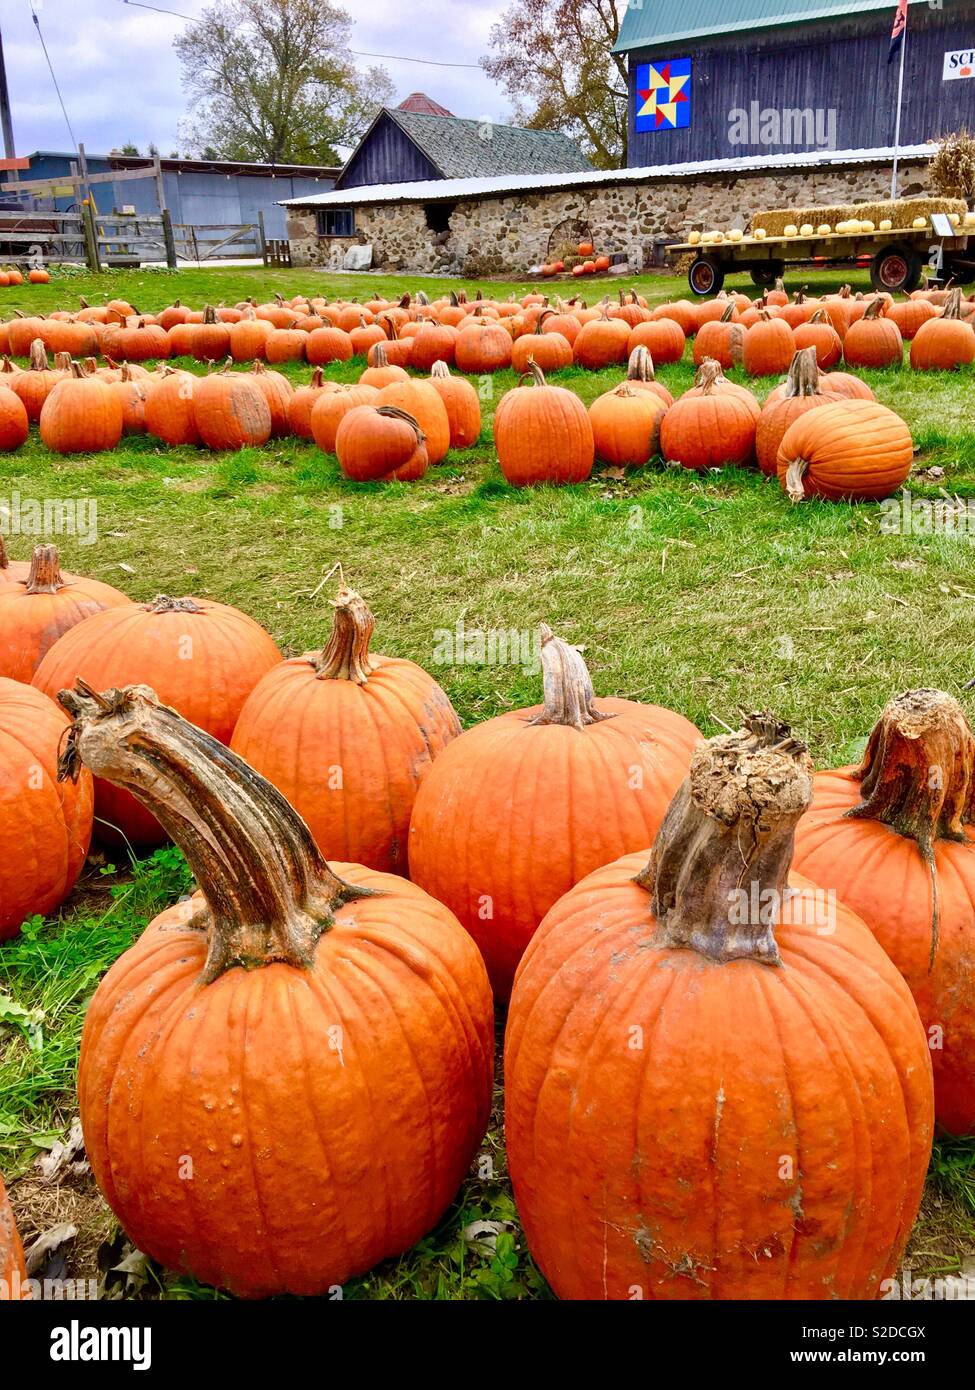 Orange Pumpkins for sale on the lawn at Wisconsin farm Stock Photo